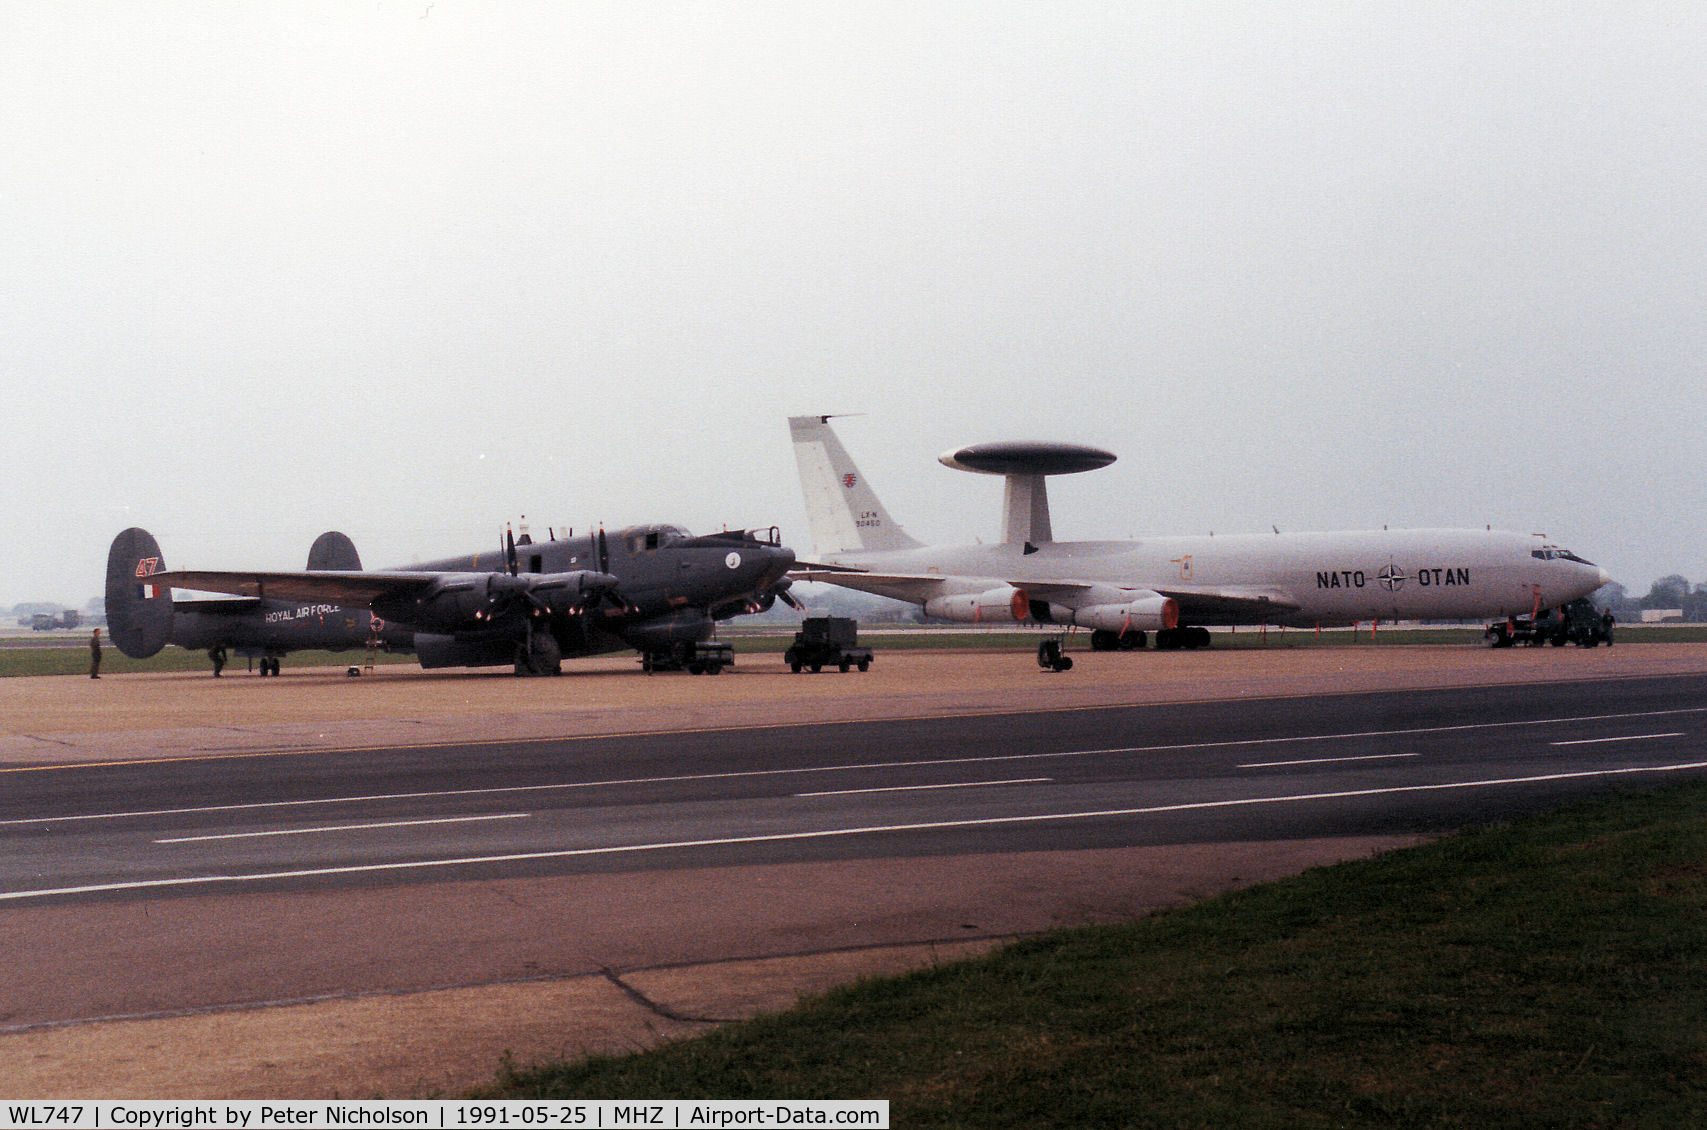 WL747, Avro 716 Shackleton AEW.2 C/N R3/696/239005, Shackleton AEW.2 of 8 Squadron at RAF Lossiemouth on the flight-line at the 1991 Mildenhall Air Fete alongside the aircraft type which would later replace it in service with the RAF.